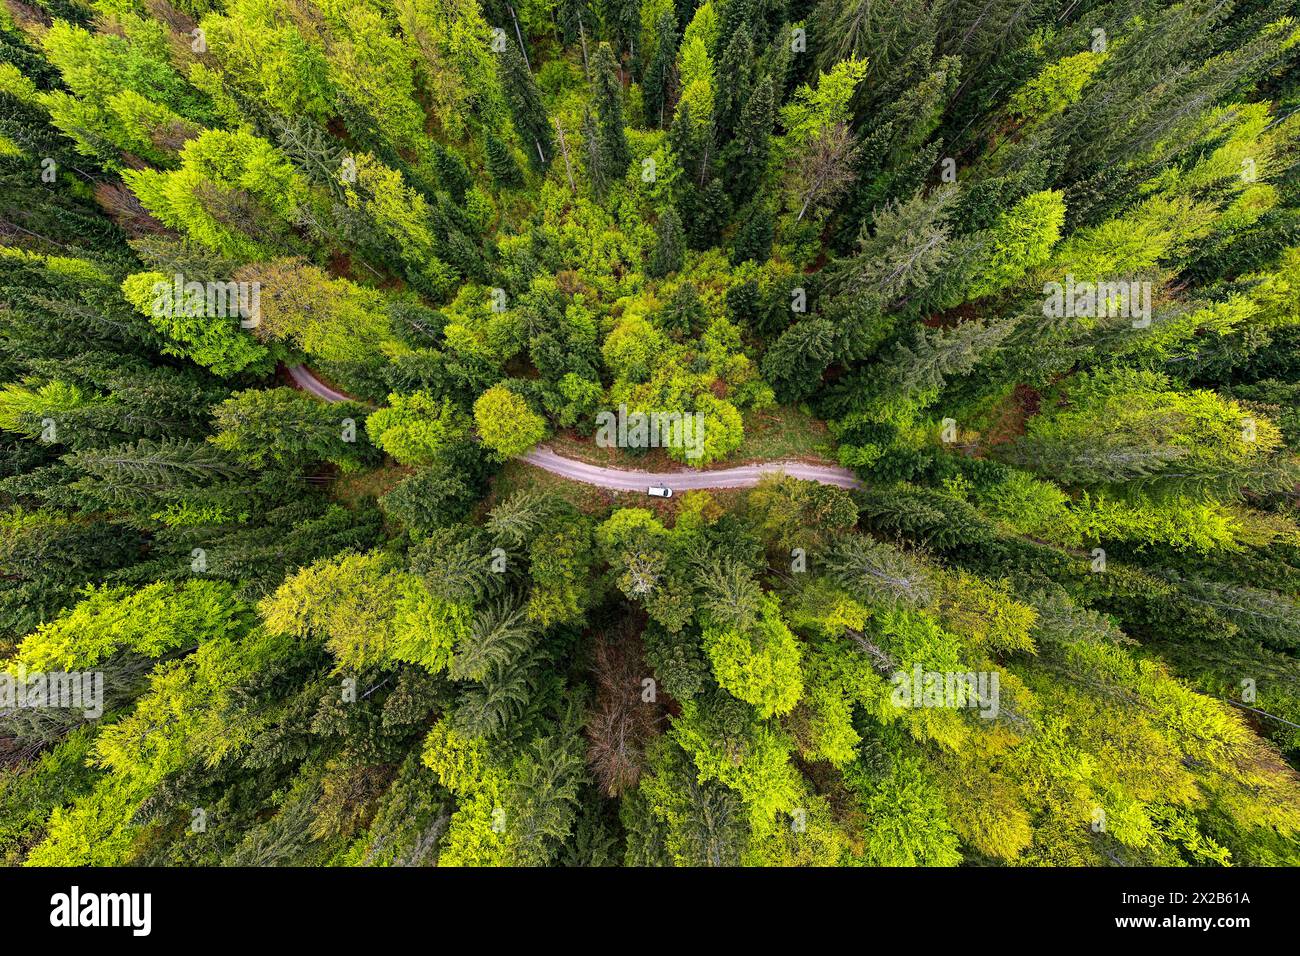 Aerial view of spectacular Kocevski rog primeval forest in spring colours and a gravel road with parked car, Dolenjska region, Slovenia Stock Photo